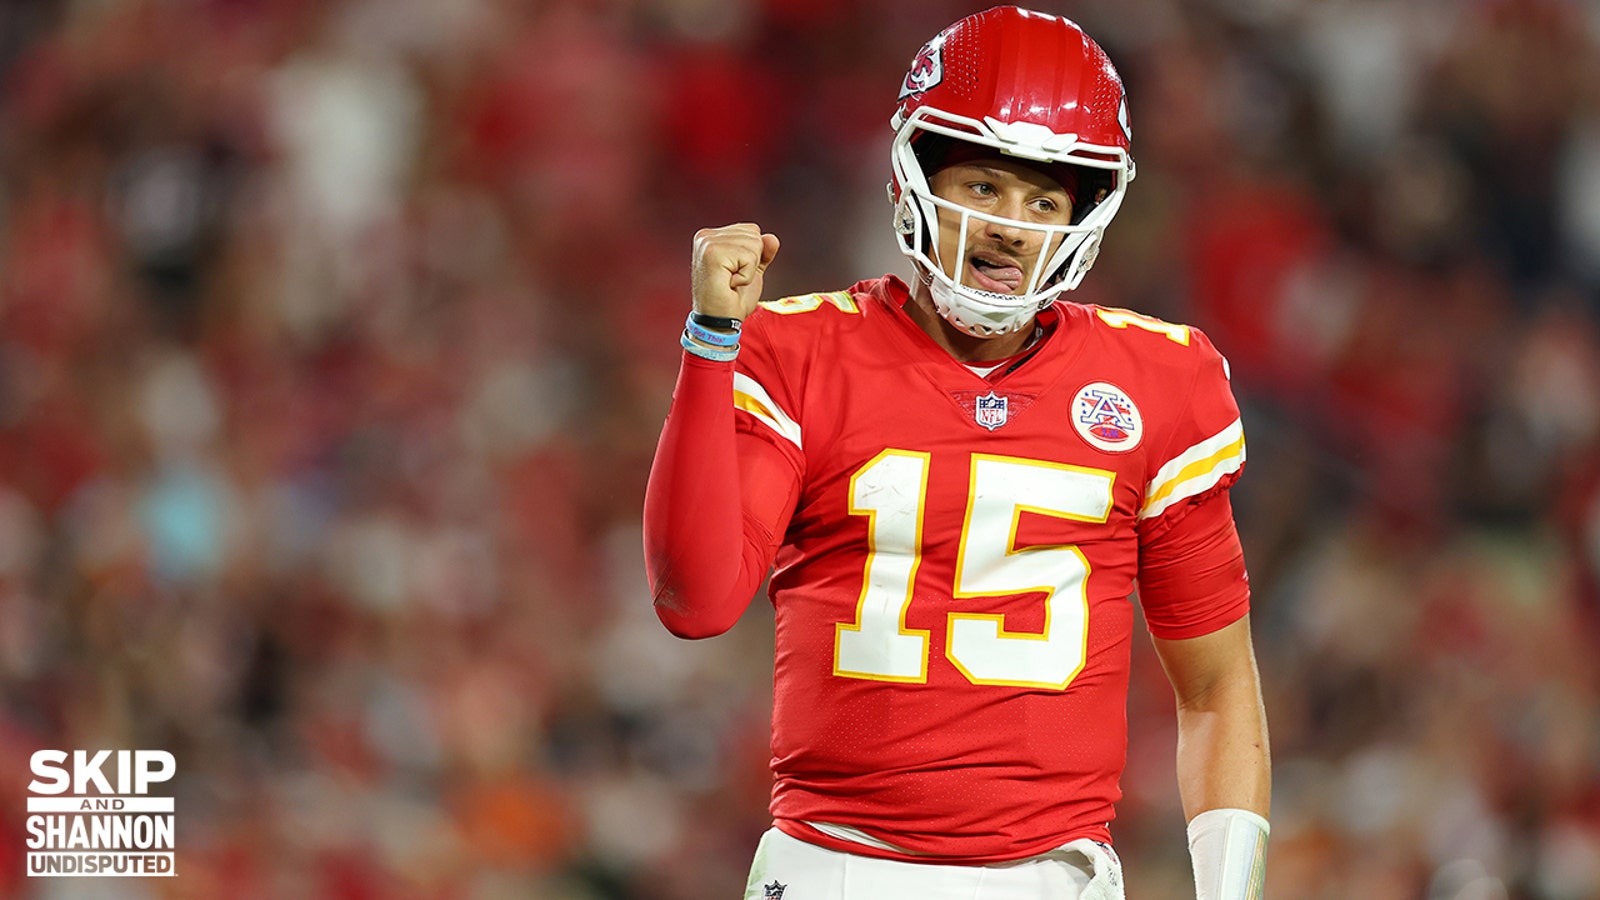 Is Mahomes the best QB in the NFL?